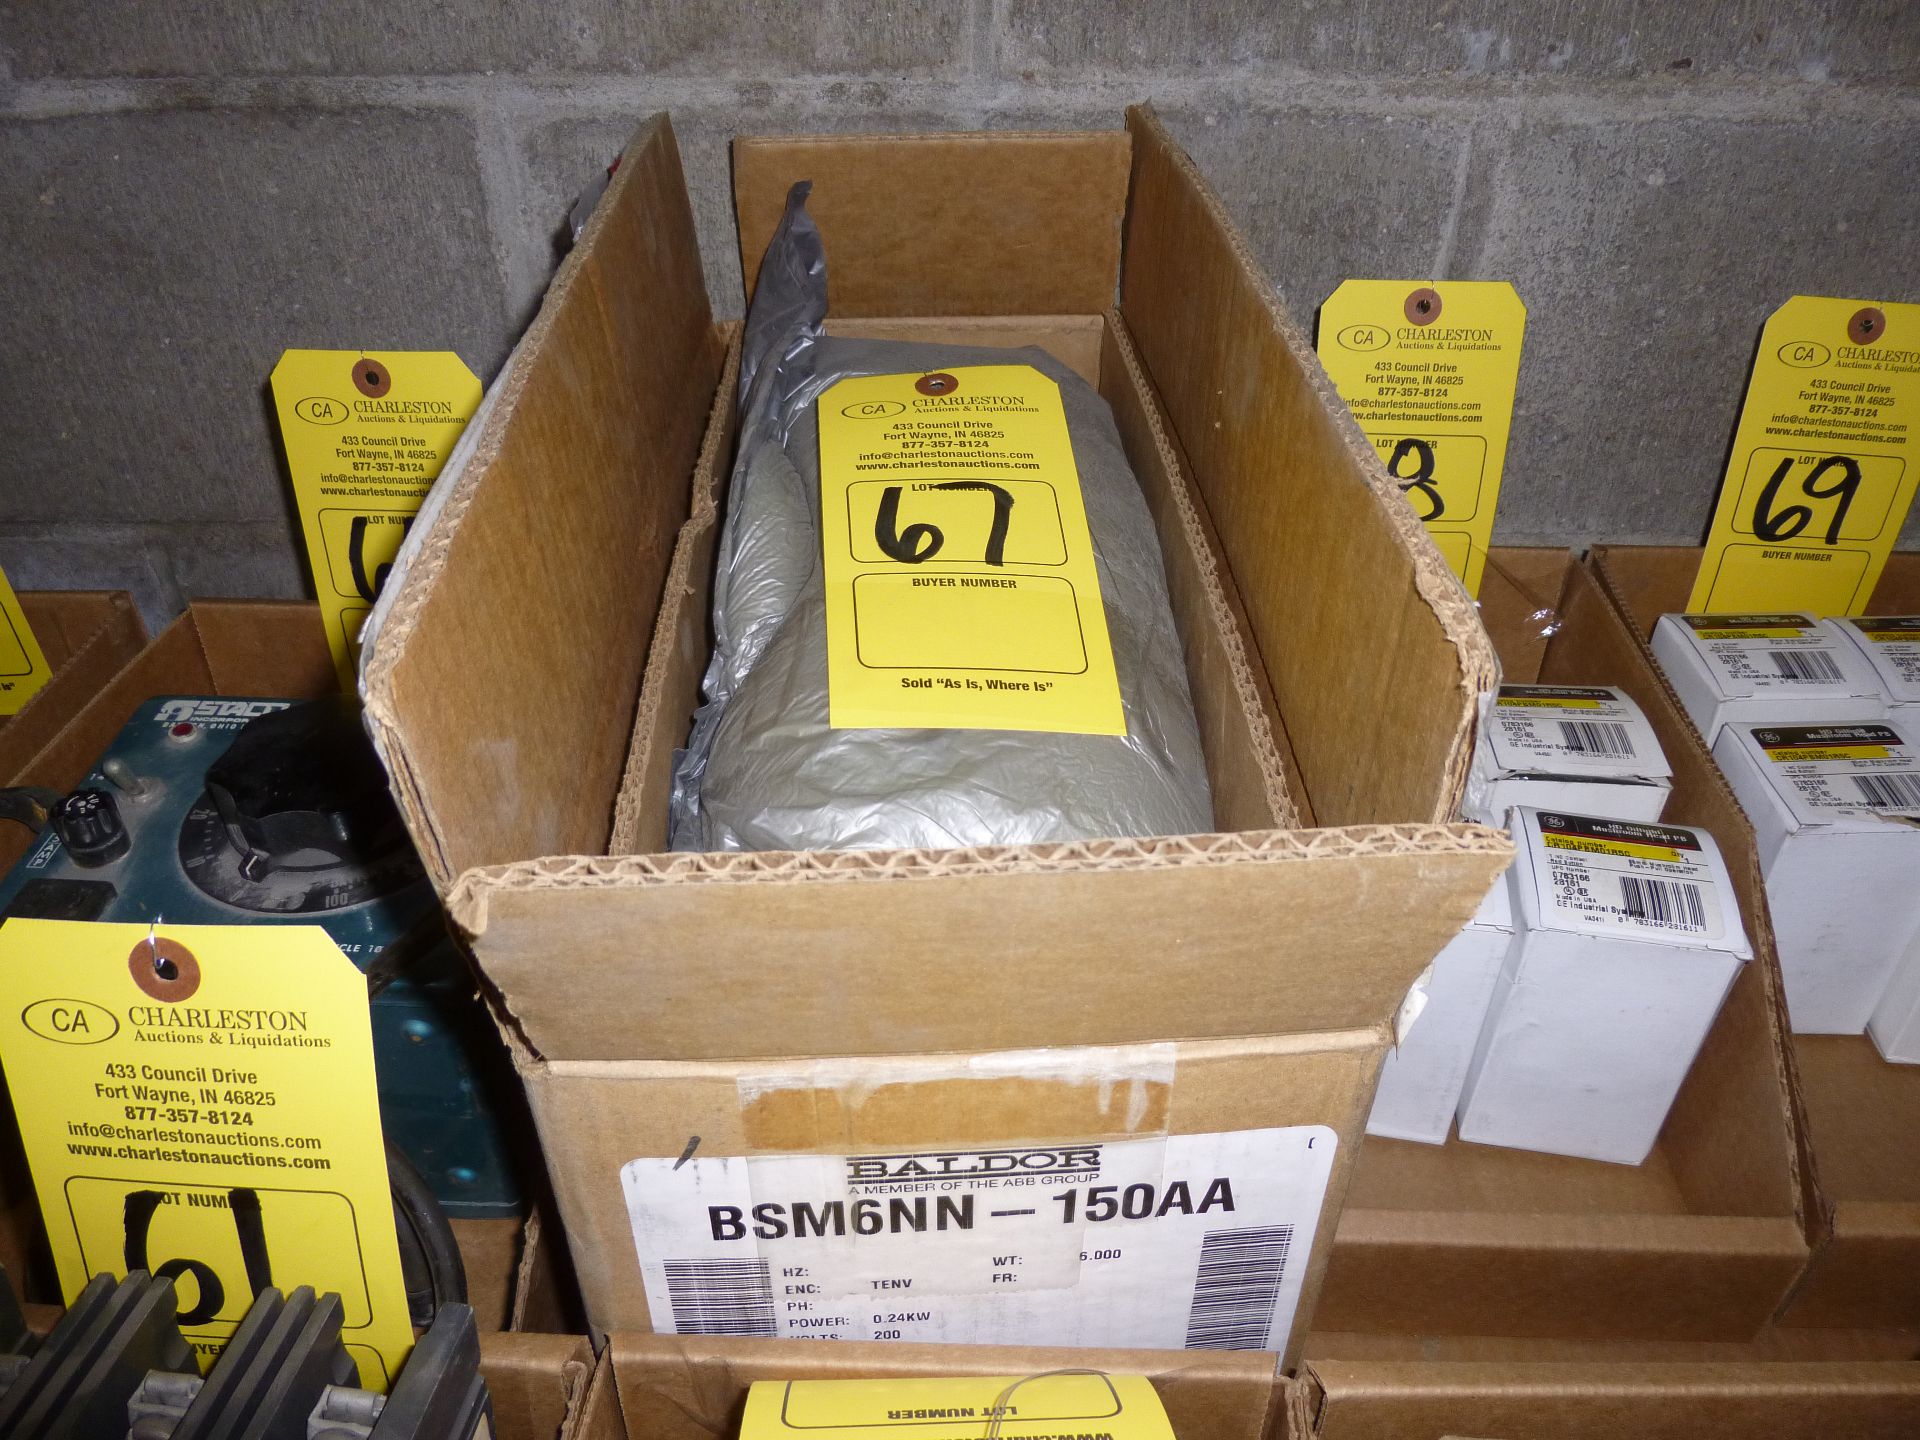 Baldor BSM6NN-150AA, new in box, as always with Brolyn LLC auctions, all lots can be picked up